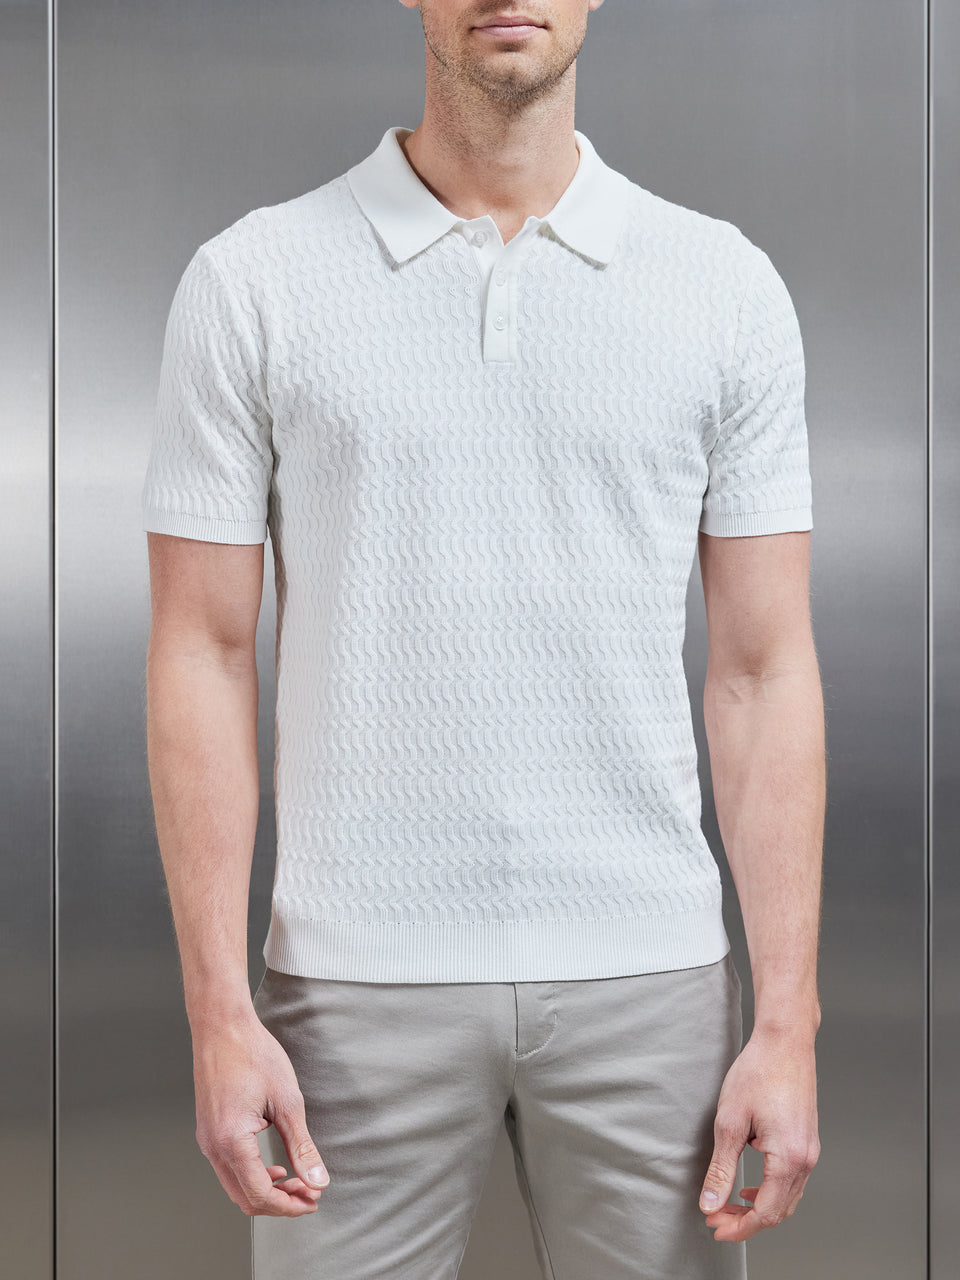 Cotton Knitted Textured Button Polo Shirt in White